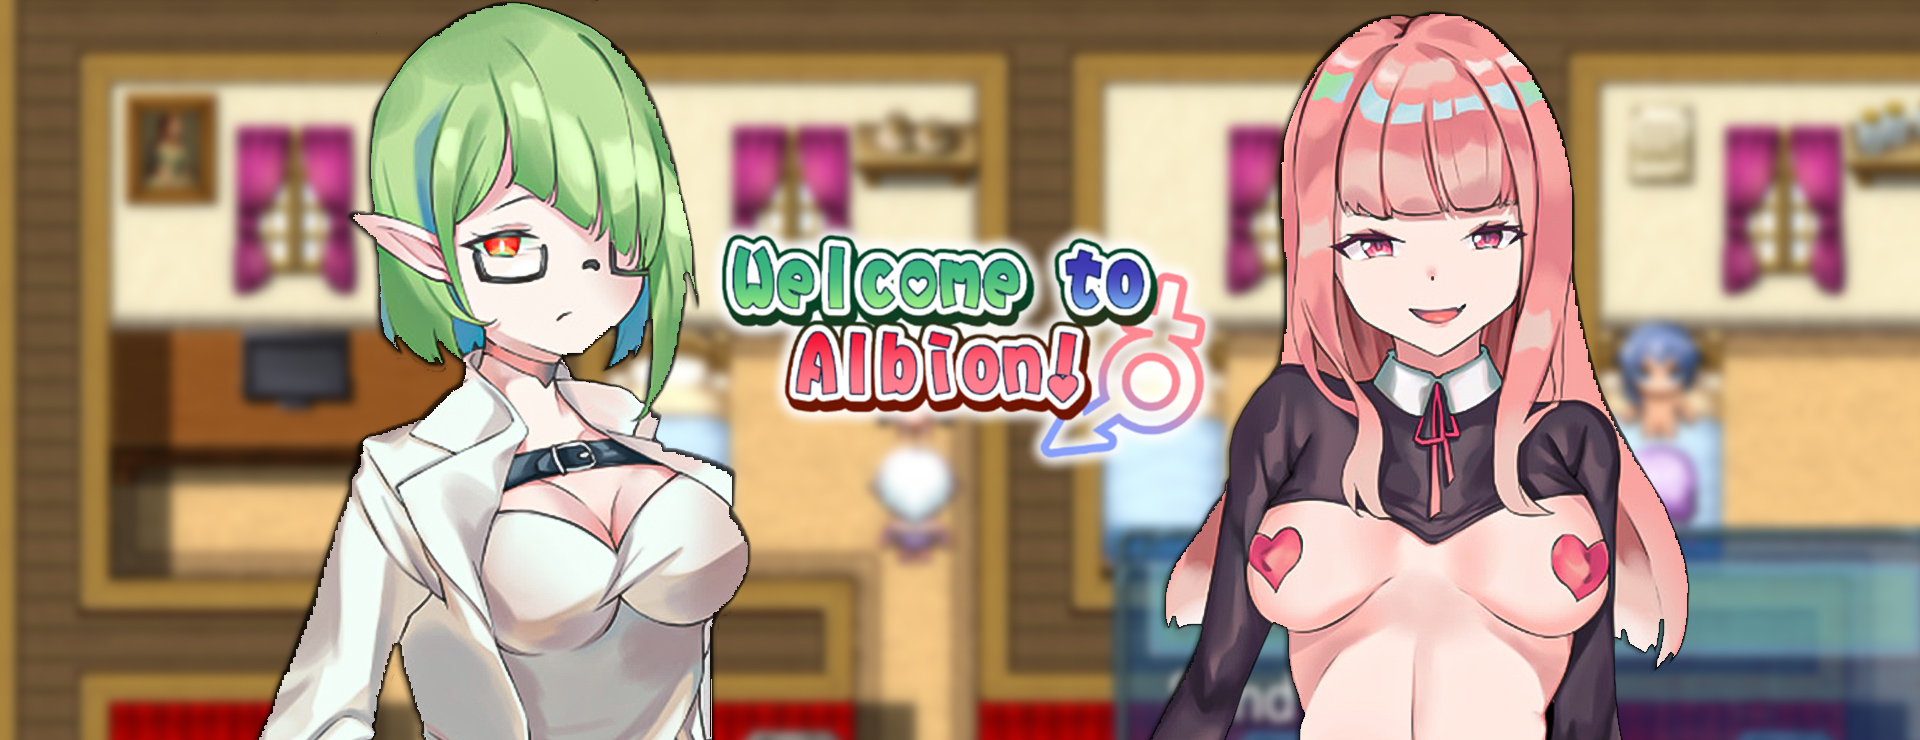 Welcome to Albion! - RPG Juego